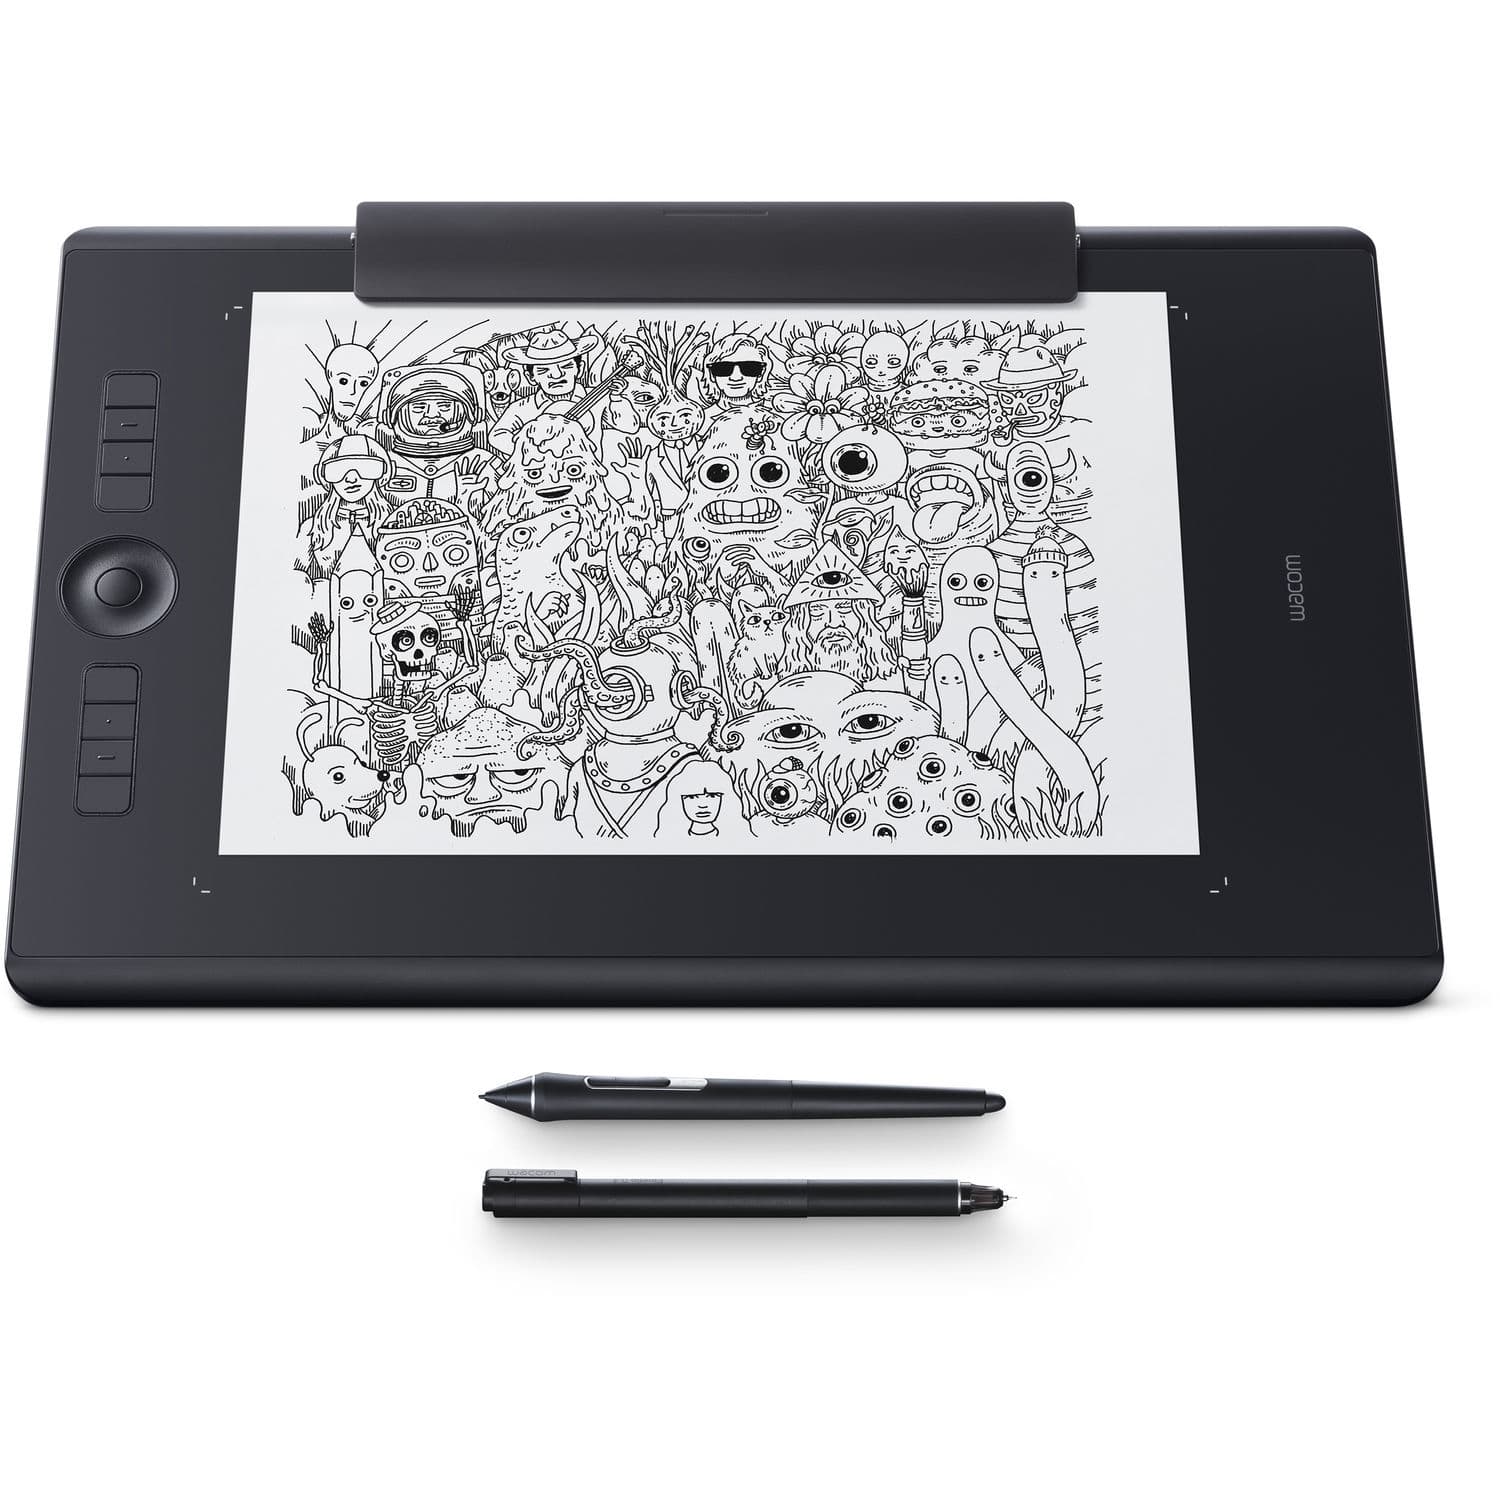 Wacom Intuos Pro Paper Edition M Drawing Graphic Tablet Board with Pro Pen 2 PTH-660/K1-CX